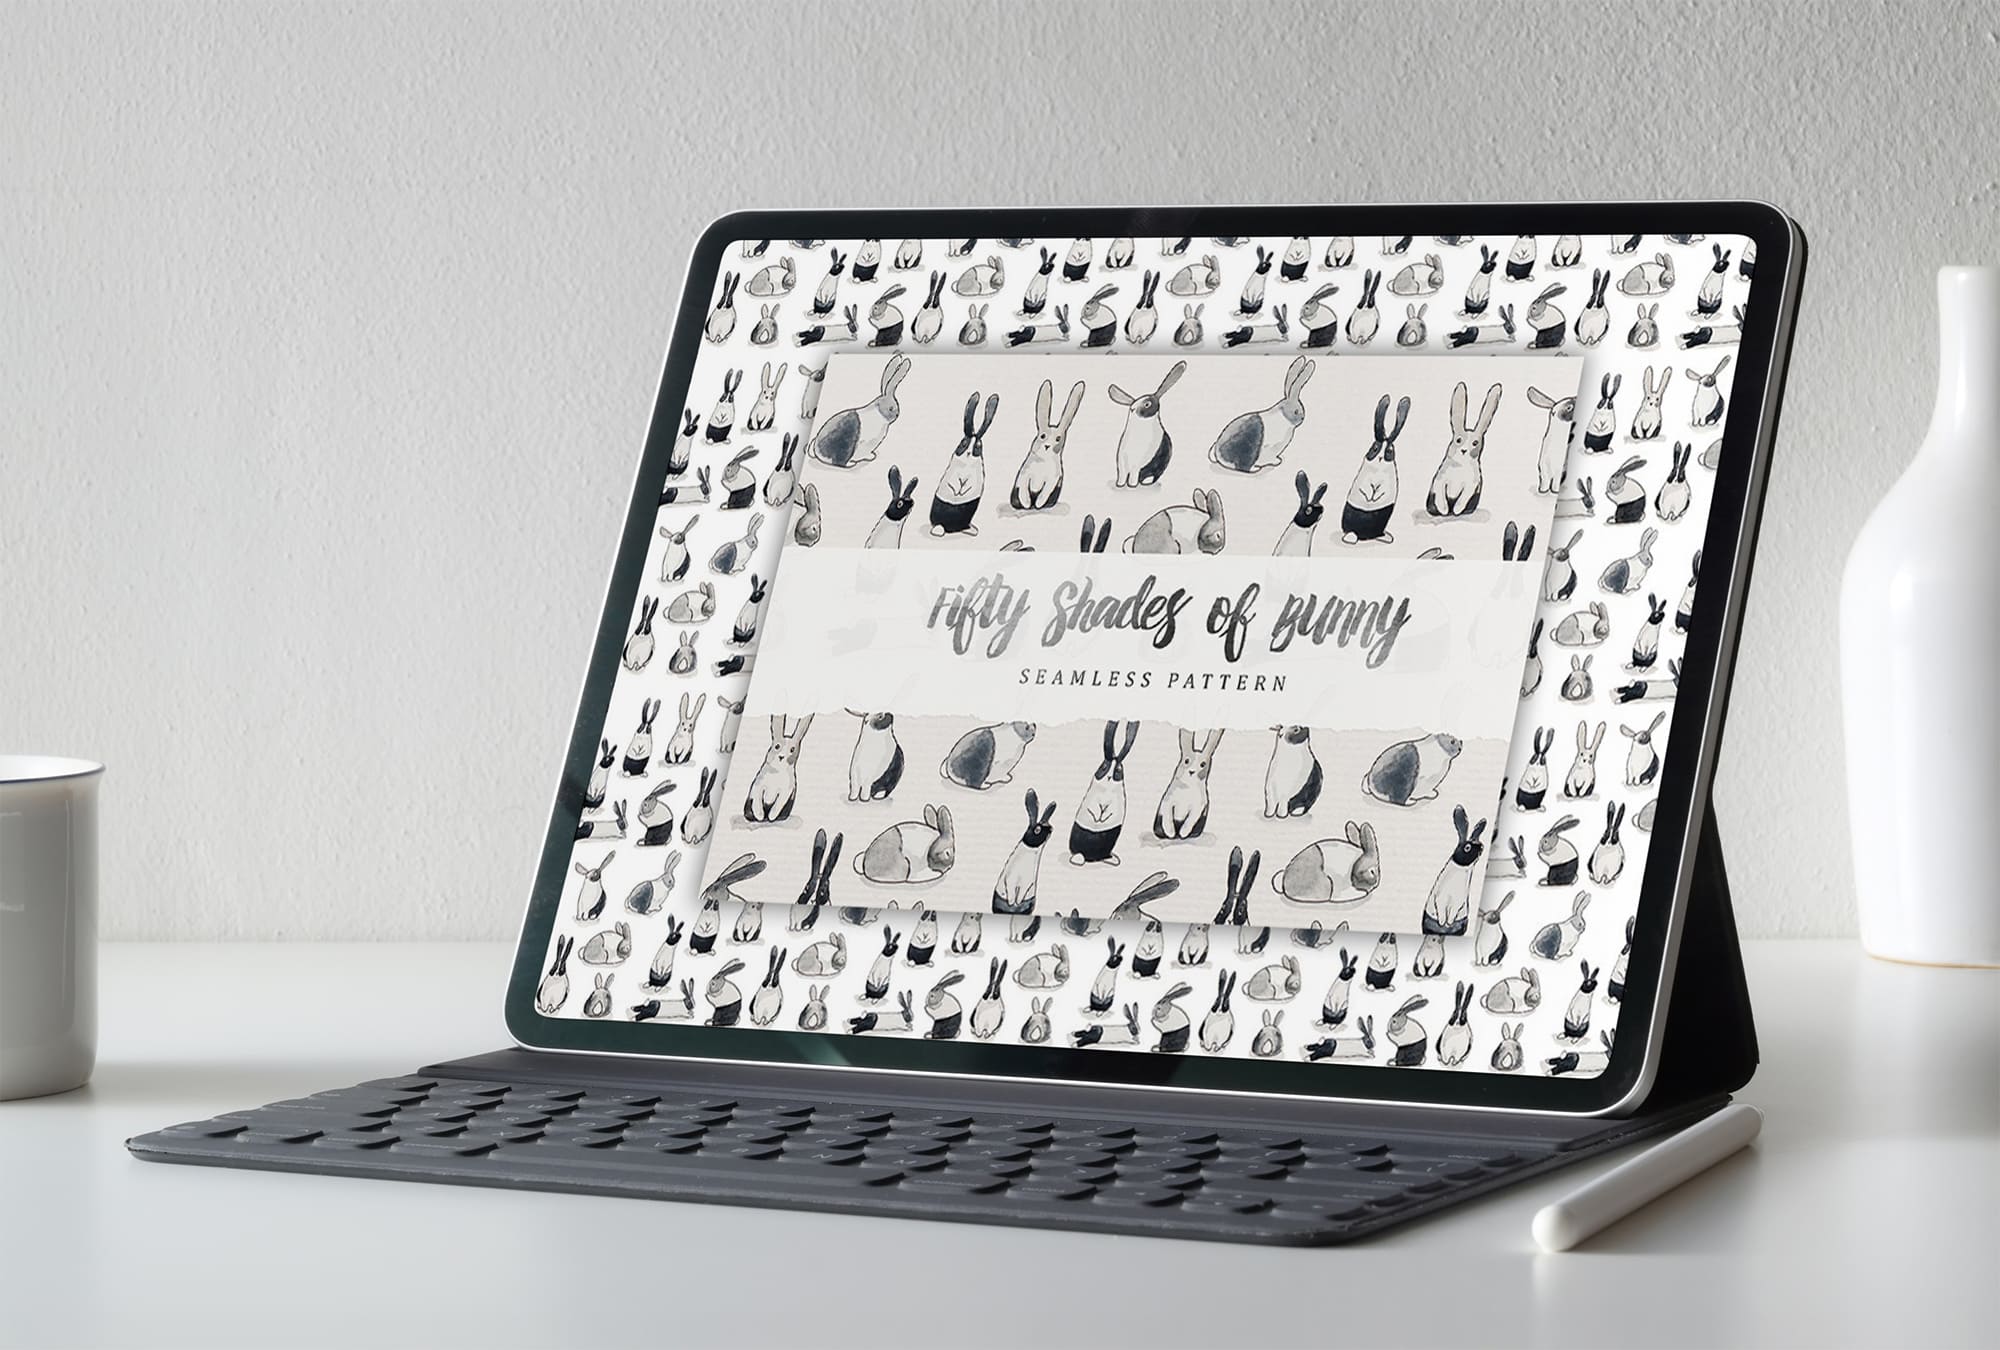 Fifty Shades of Bunny - tablet.